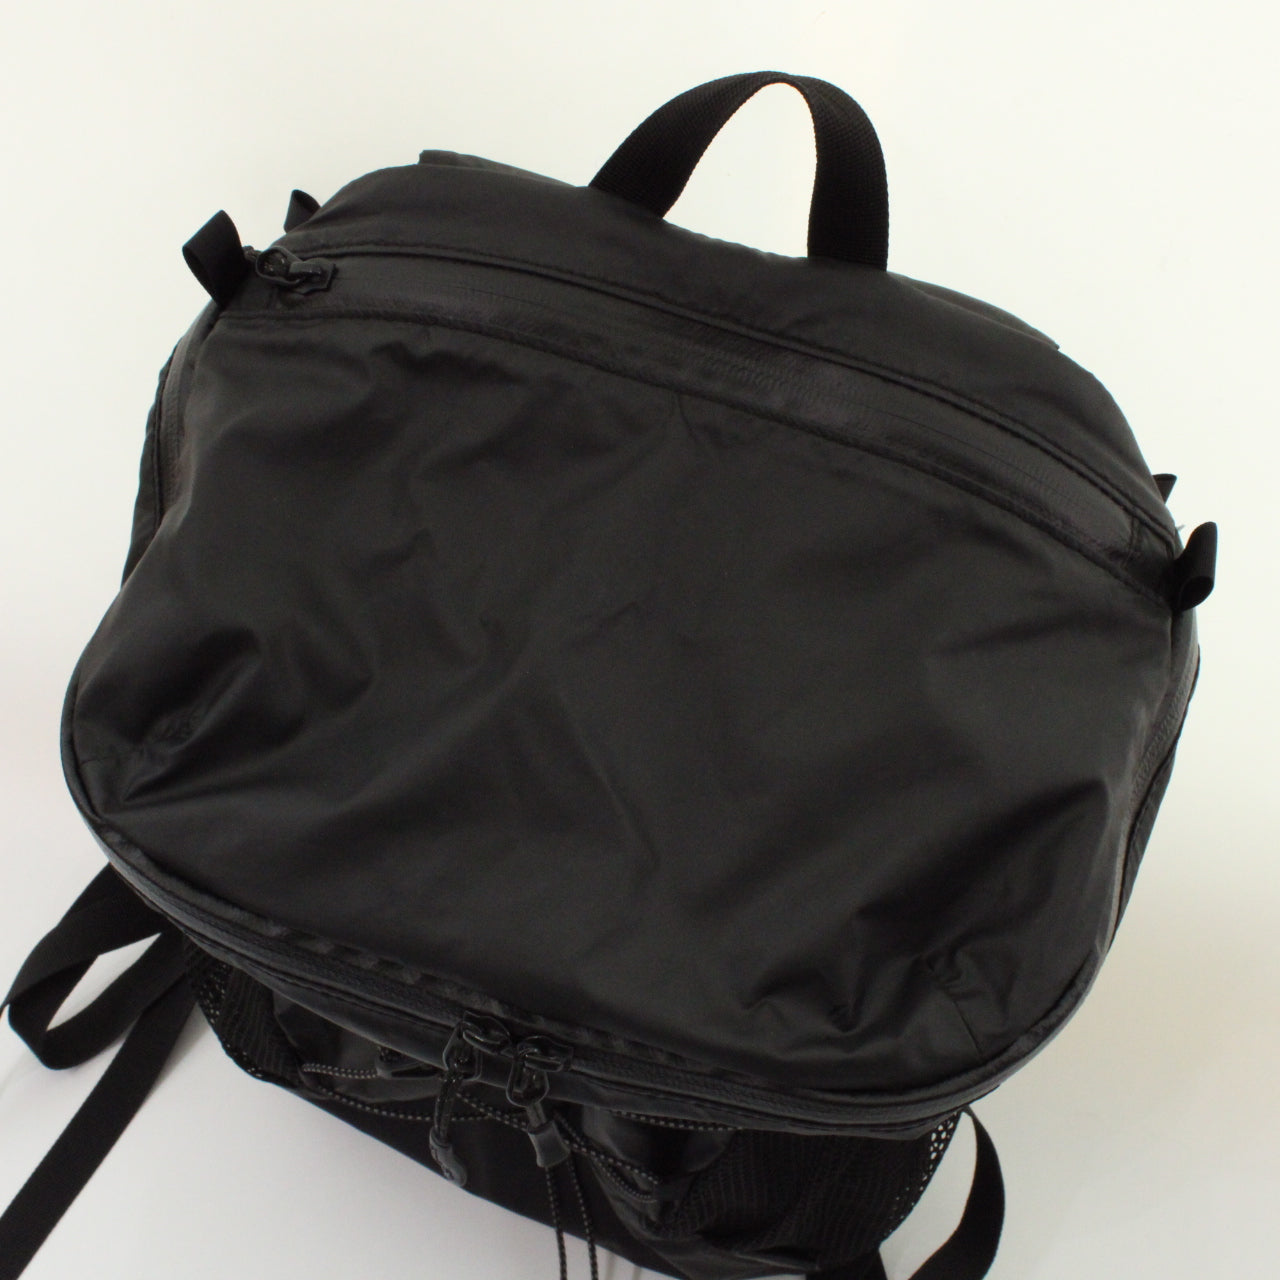 Active Field Light Backpack